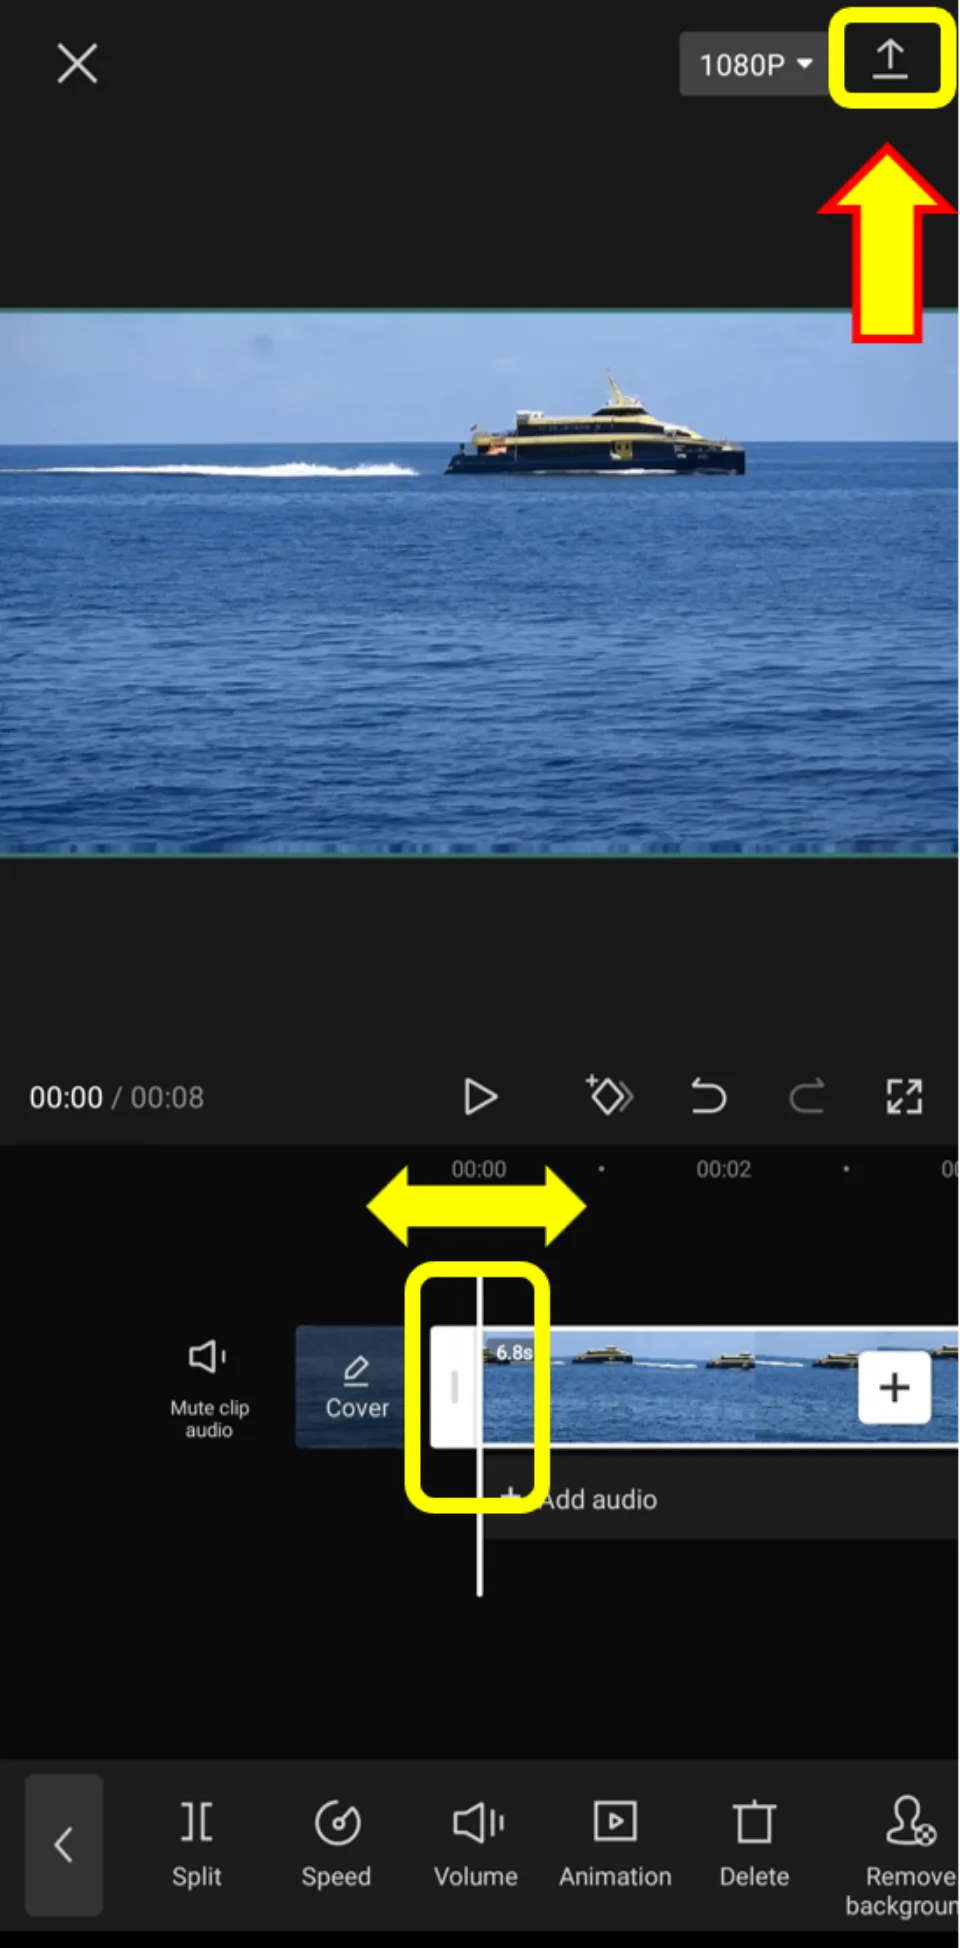 Then, drag the slider to select the ending and beginning time of the new clip. Hit Export icon.